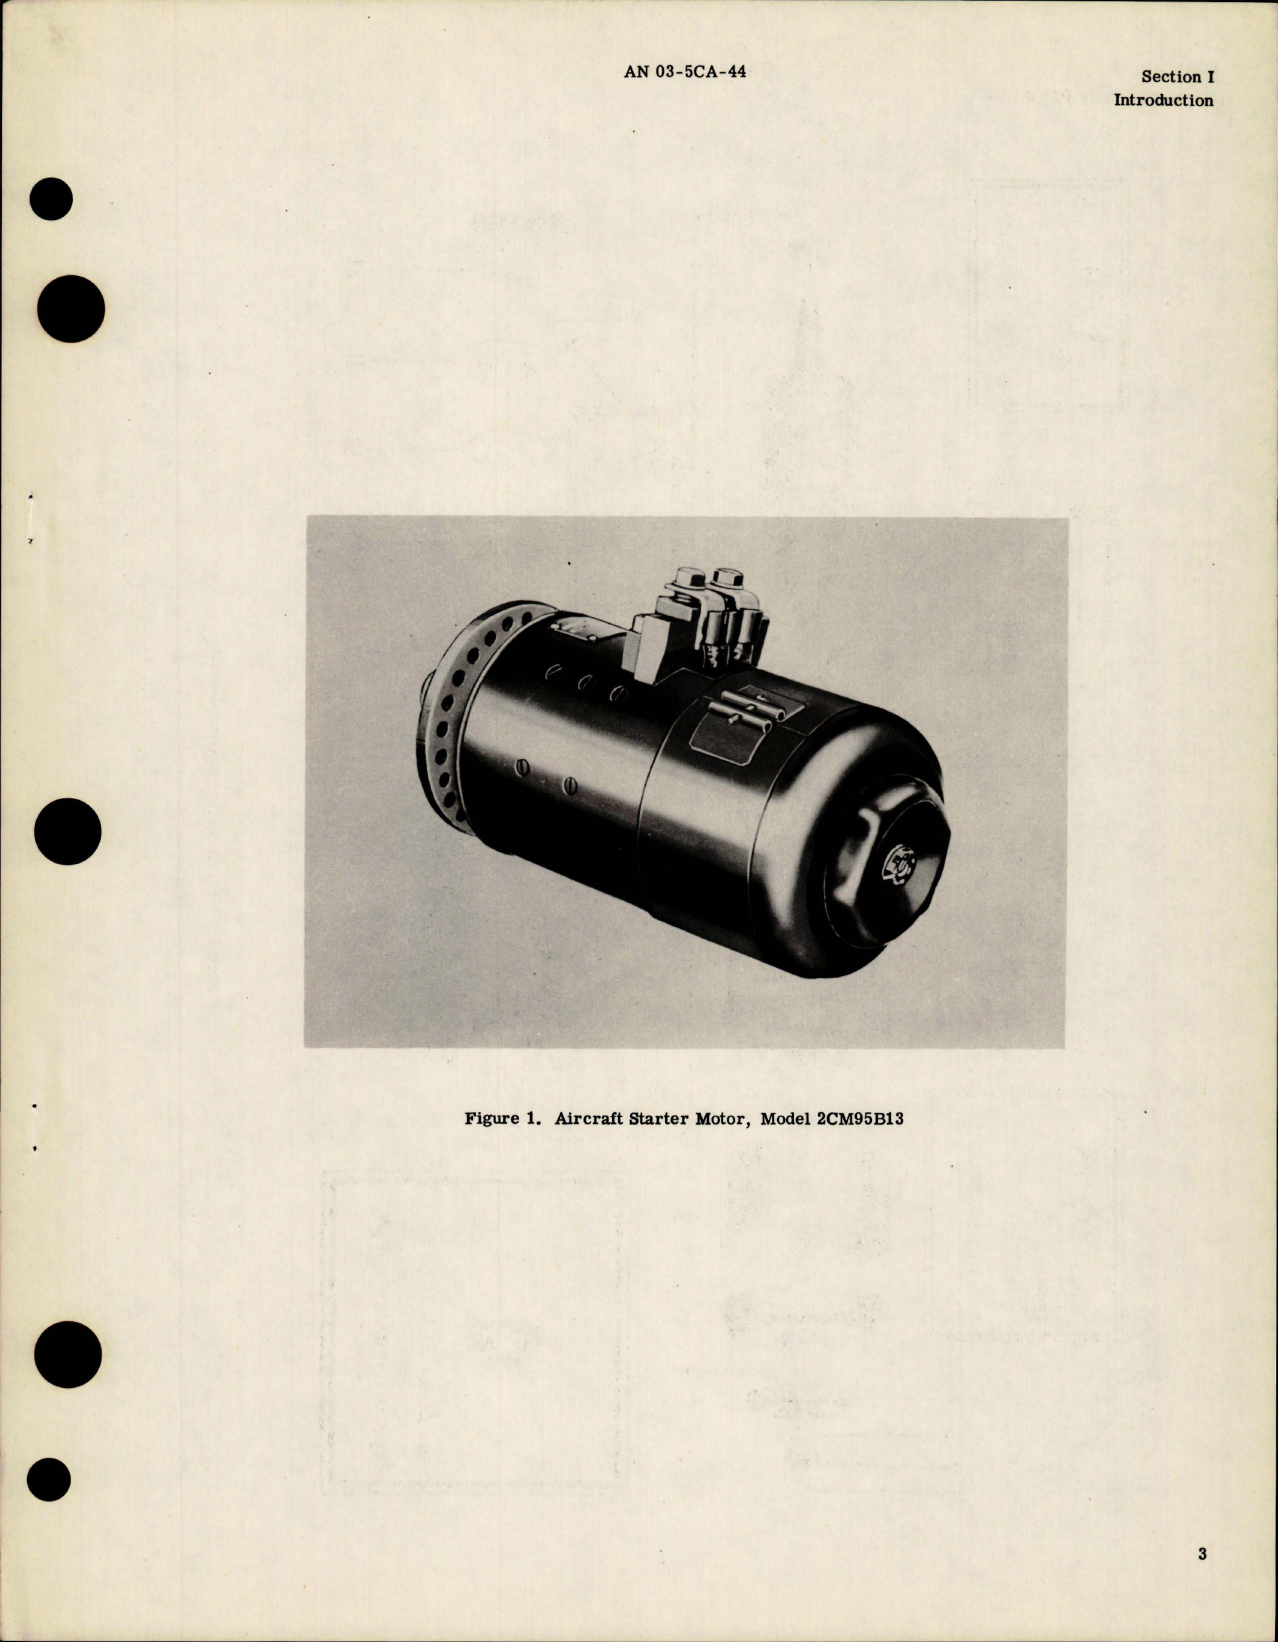 Sample page 5 from AirCorps Library document: Illustrated Parts for Starter Motors - Models 2CM95B13, 2CM95B18, 2CM95B19 